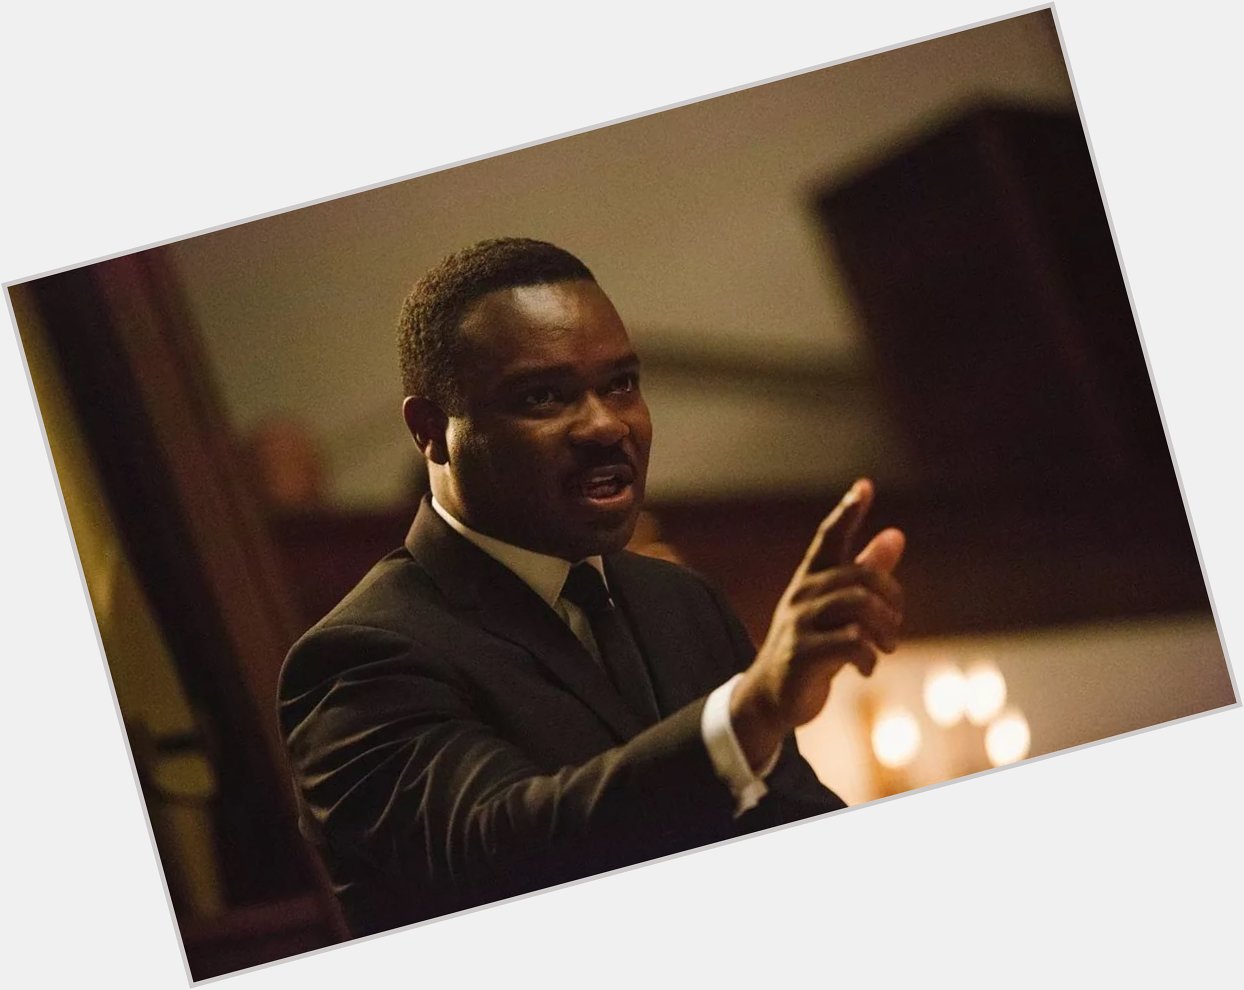 Happy birthday to the great David Oyelowo, who deserved an Oscar nomination for his riveting turn in Selma 